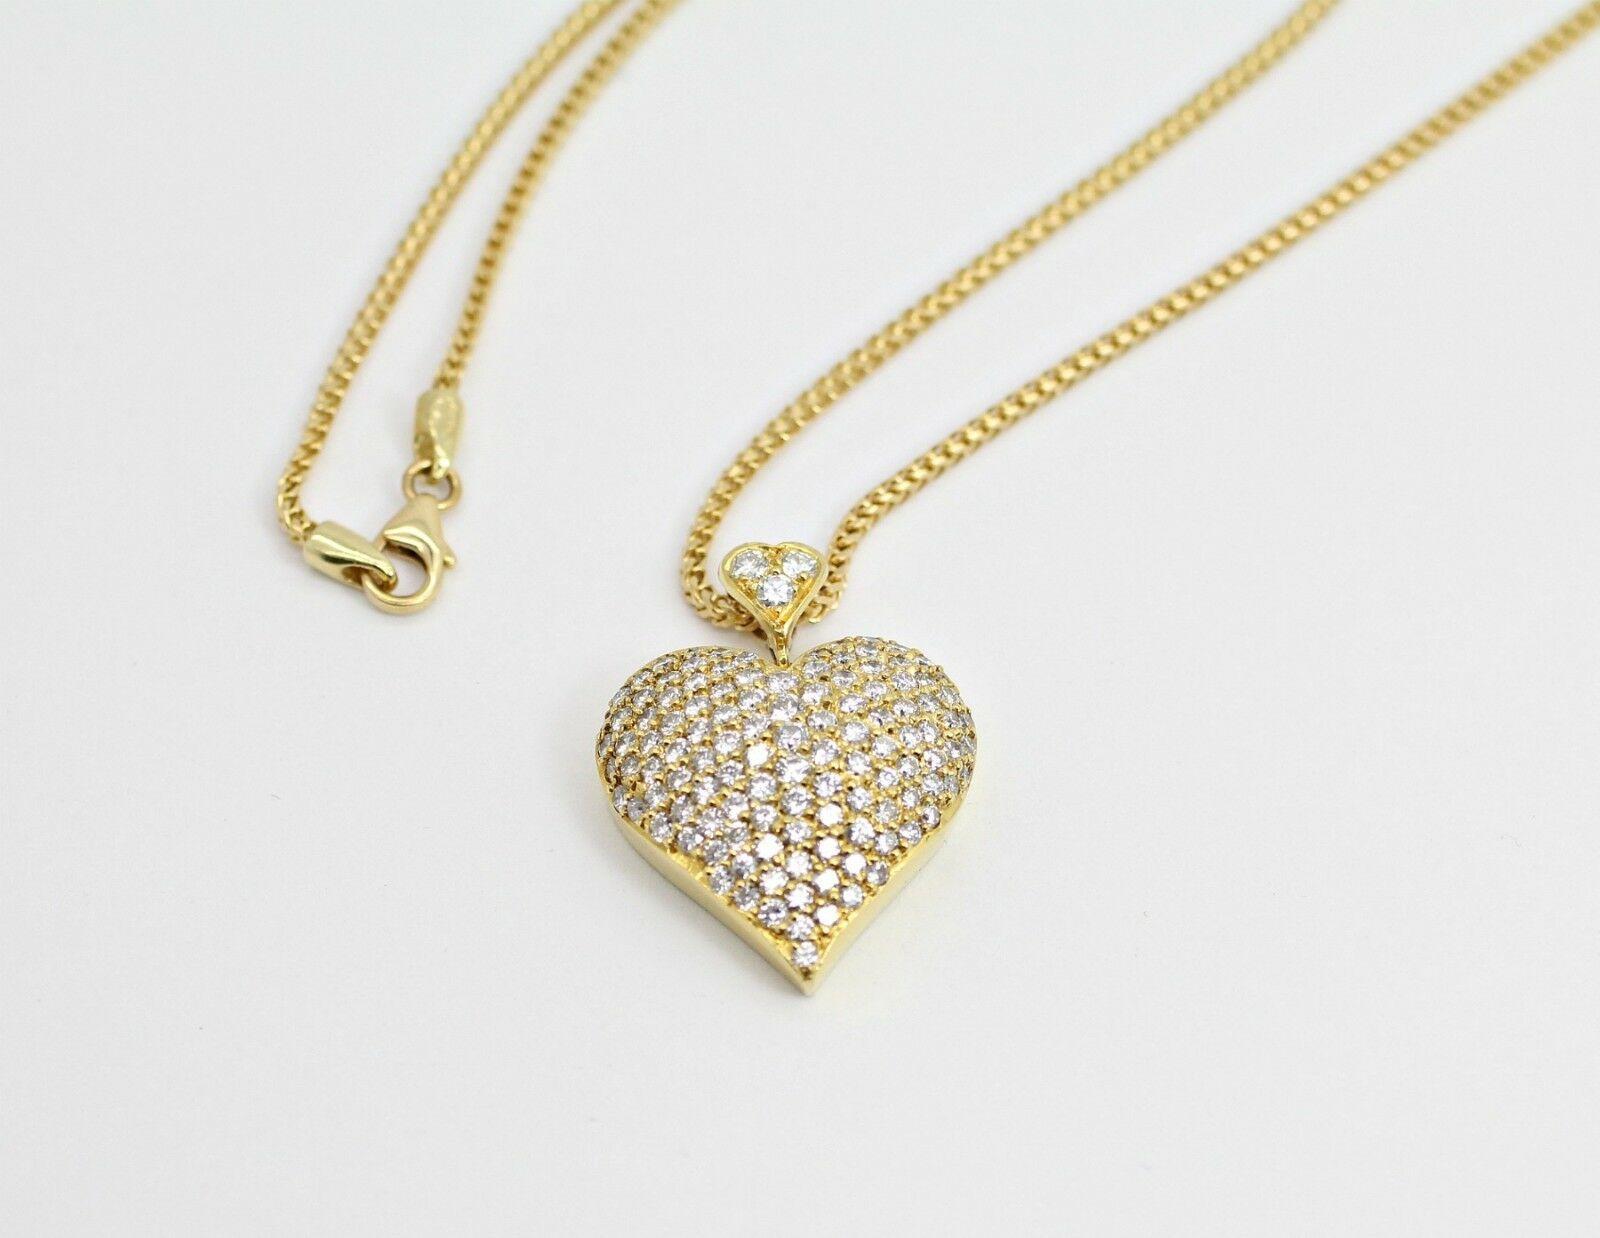 Diamond Specifications
Main Stone:Diamonds
Shape:   Round
Carat Total Weight:  2.50ctw 
Color:    D  
Clarity:   VS2 - SI1
Jewelry Specifications
Brand:
Metal: 14k yellow gold
Type: Heart Necklace
BuyWeight:   16.11 grams
Size:  18 inch chain       